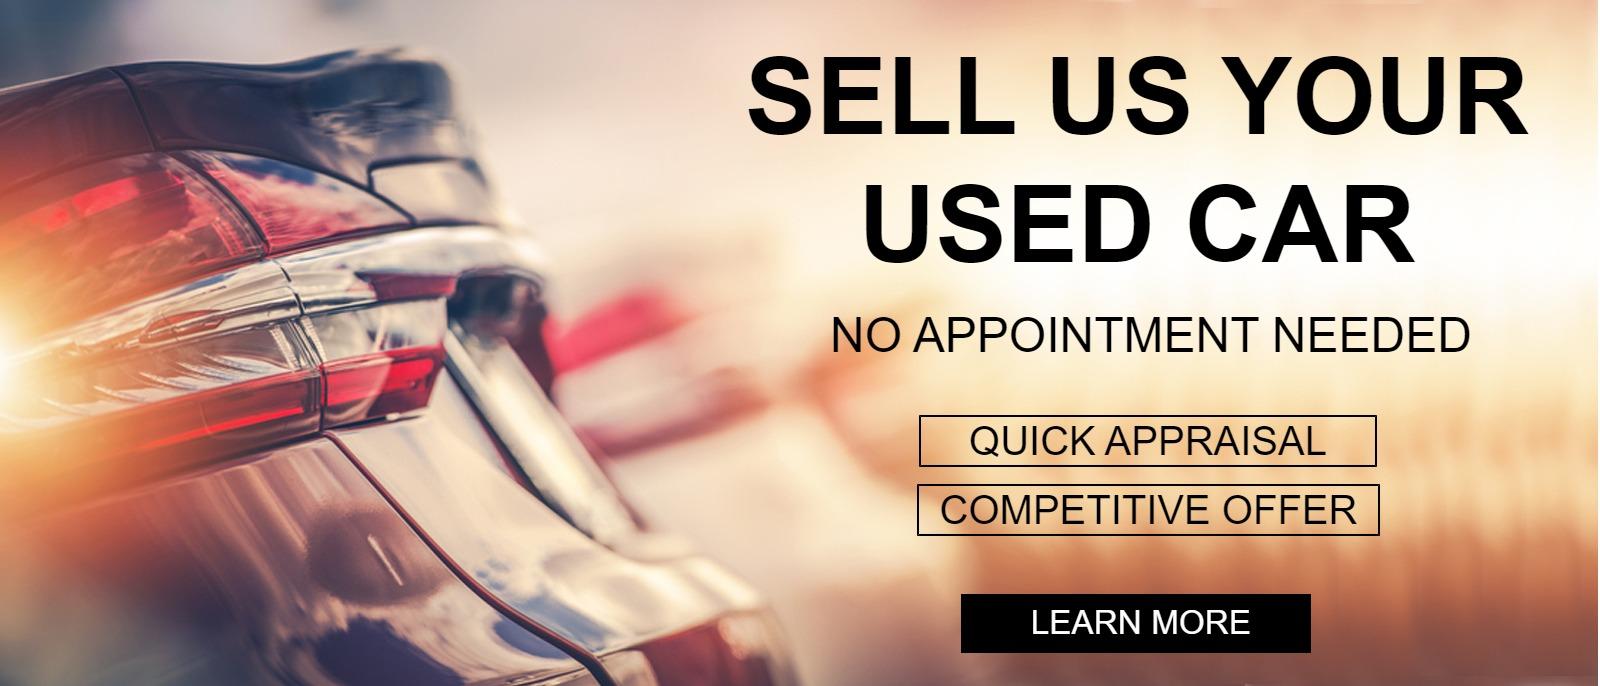 SELL US YOUR USED CAR
 No Appointment Needed
"Quick Appraisal" "Competitive Offer"
LEARN MORE